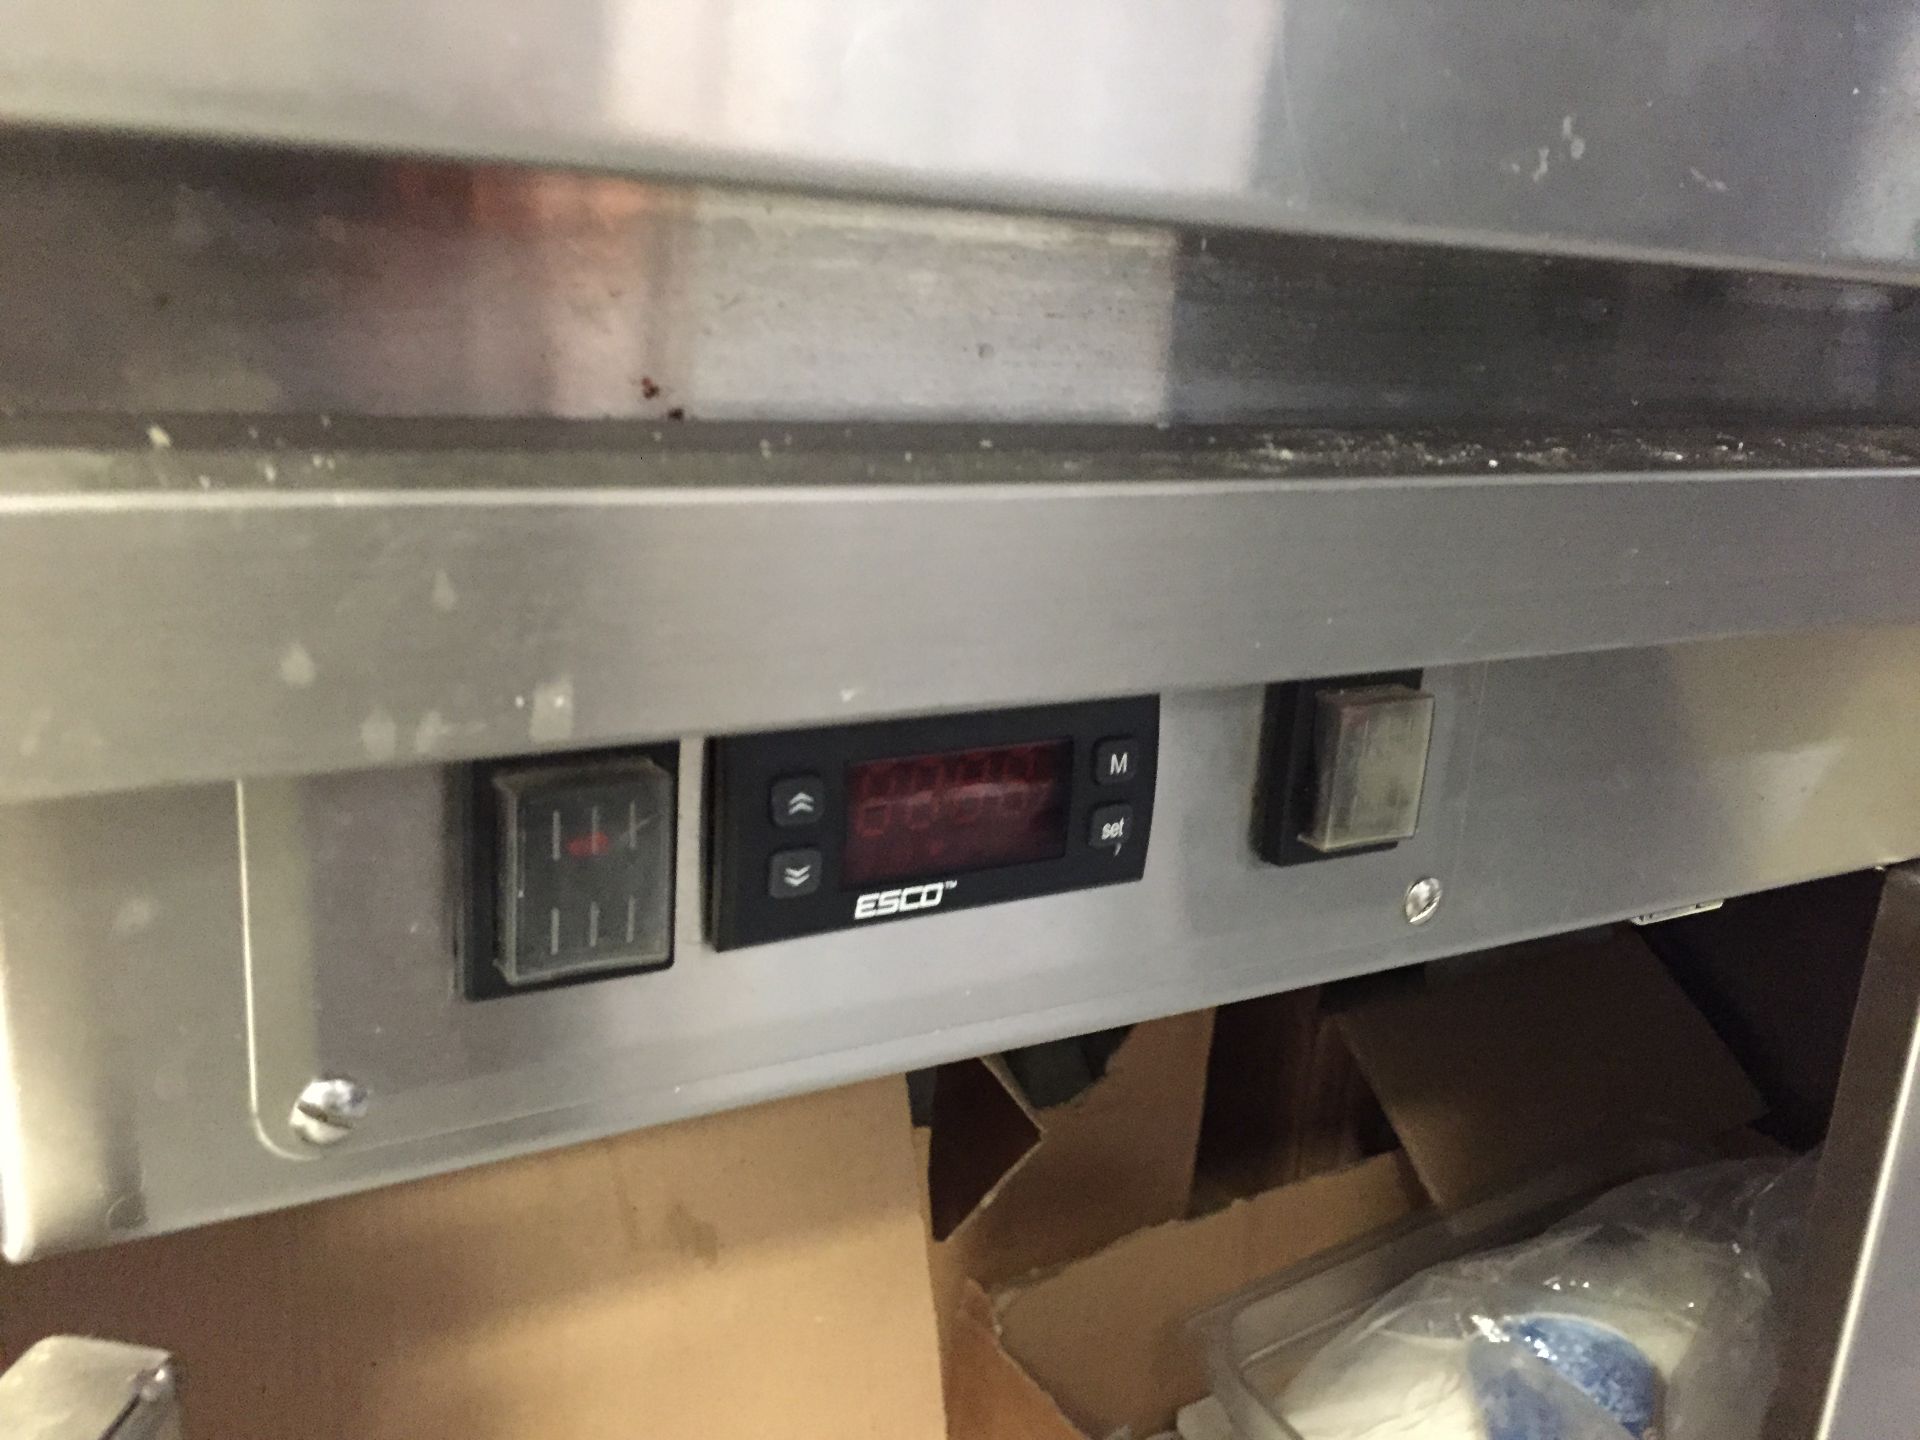 1 x Pitco Frialator Stainless Steel Chips / Fries Warmer - Keeps Fries Warm and Provides a Salter - Image 3 of 5